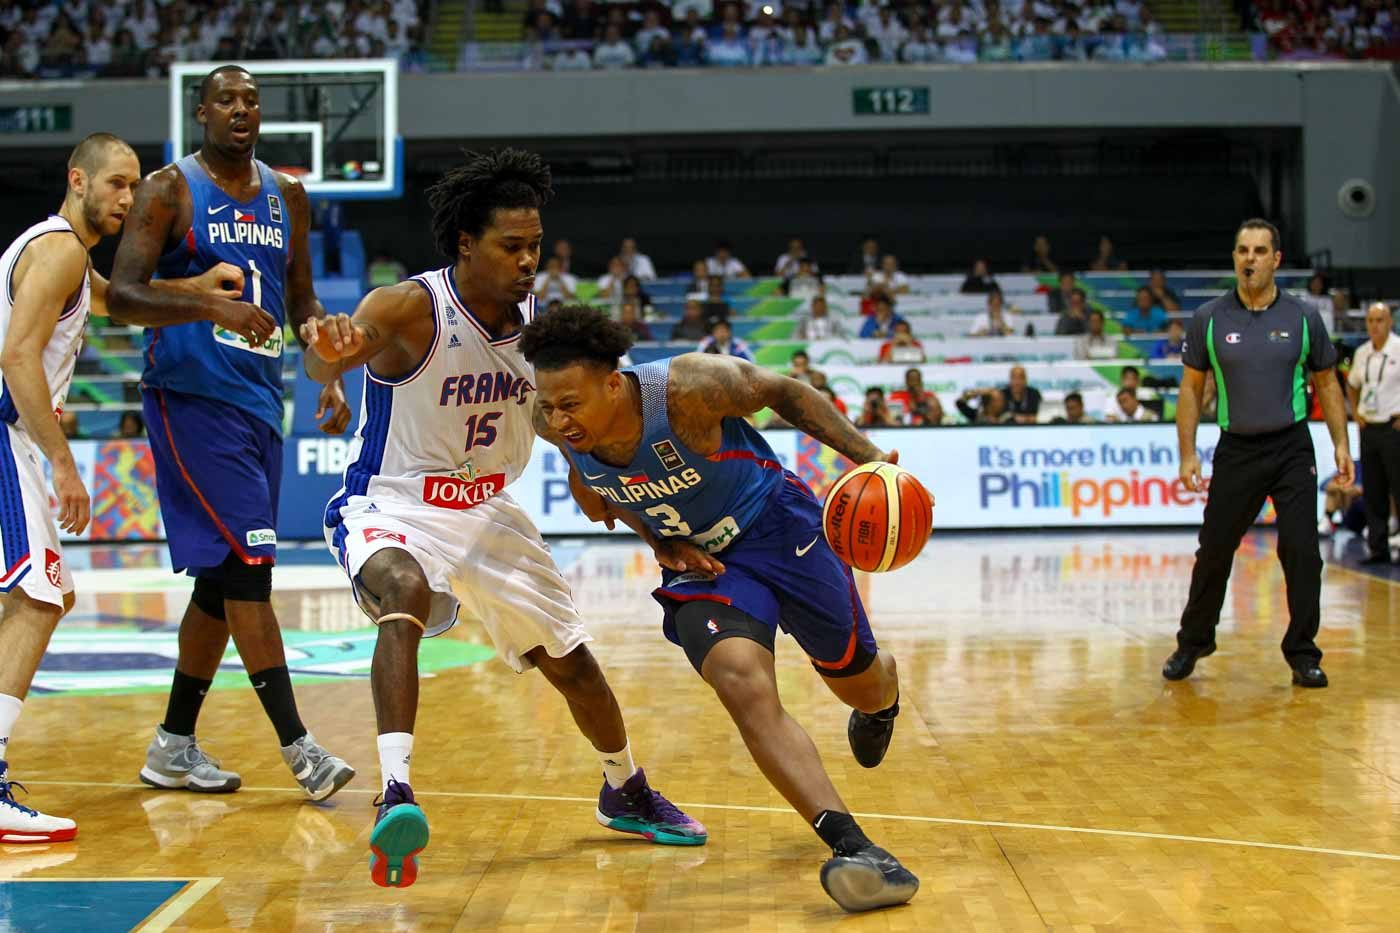 Bobby Ray Parks Jr drives for an and-1 play against France. Photo by Josh Albelda/Rappler 